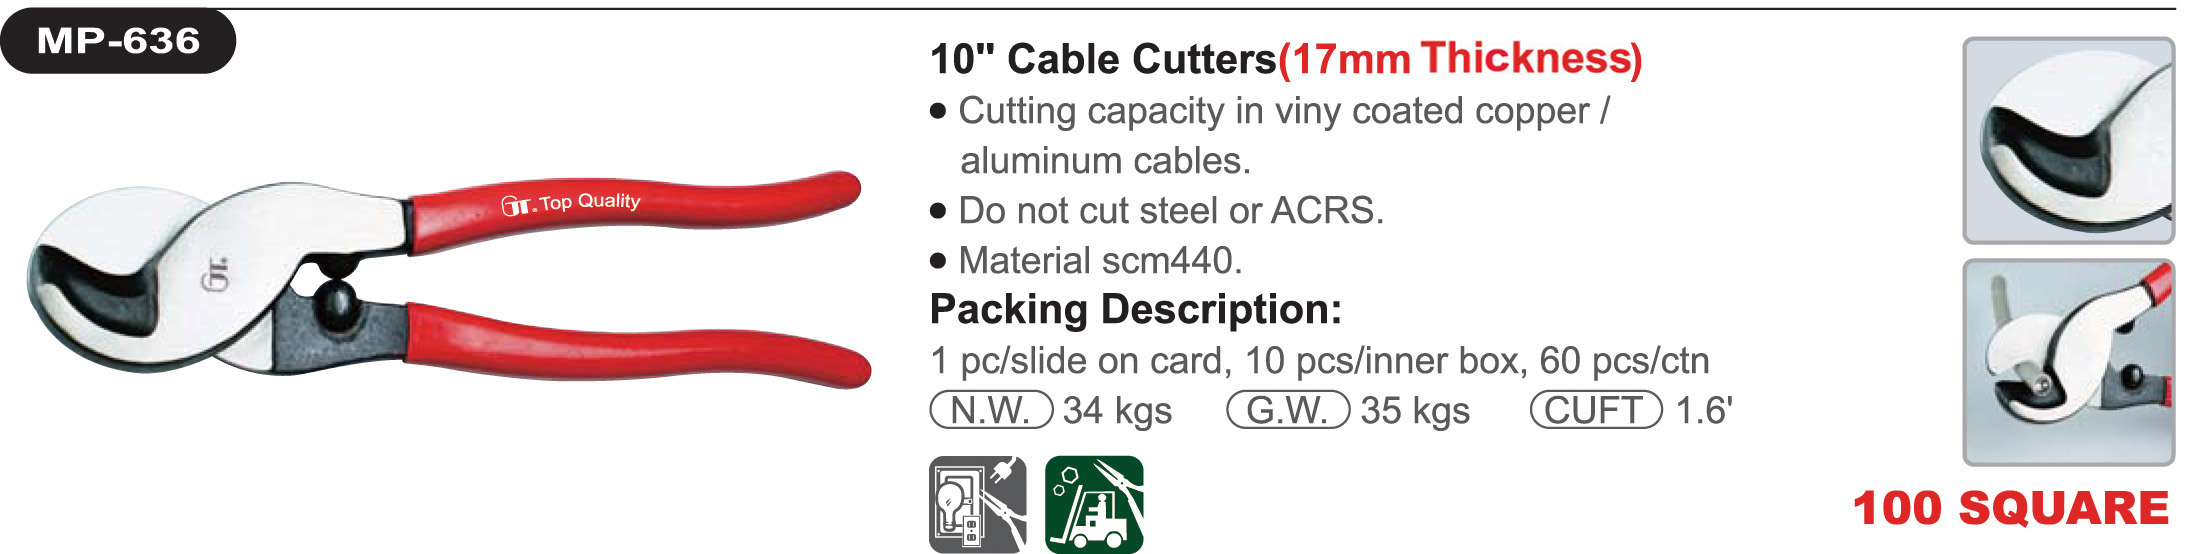 proimages/product/pliers/cable_and_wire_rope_cutter/Precision_Cable_Cutter/MP-636/MP-636.jpg